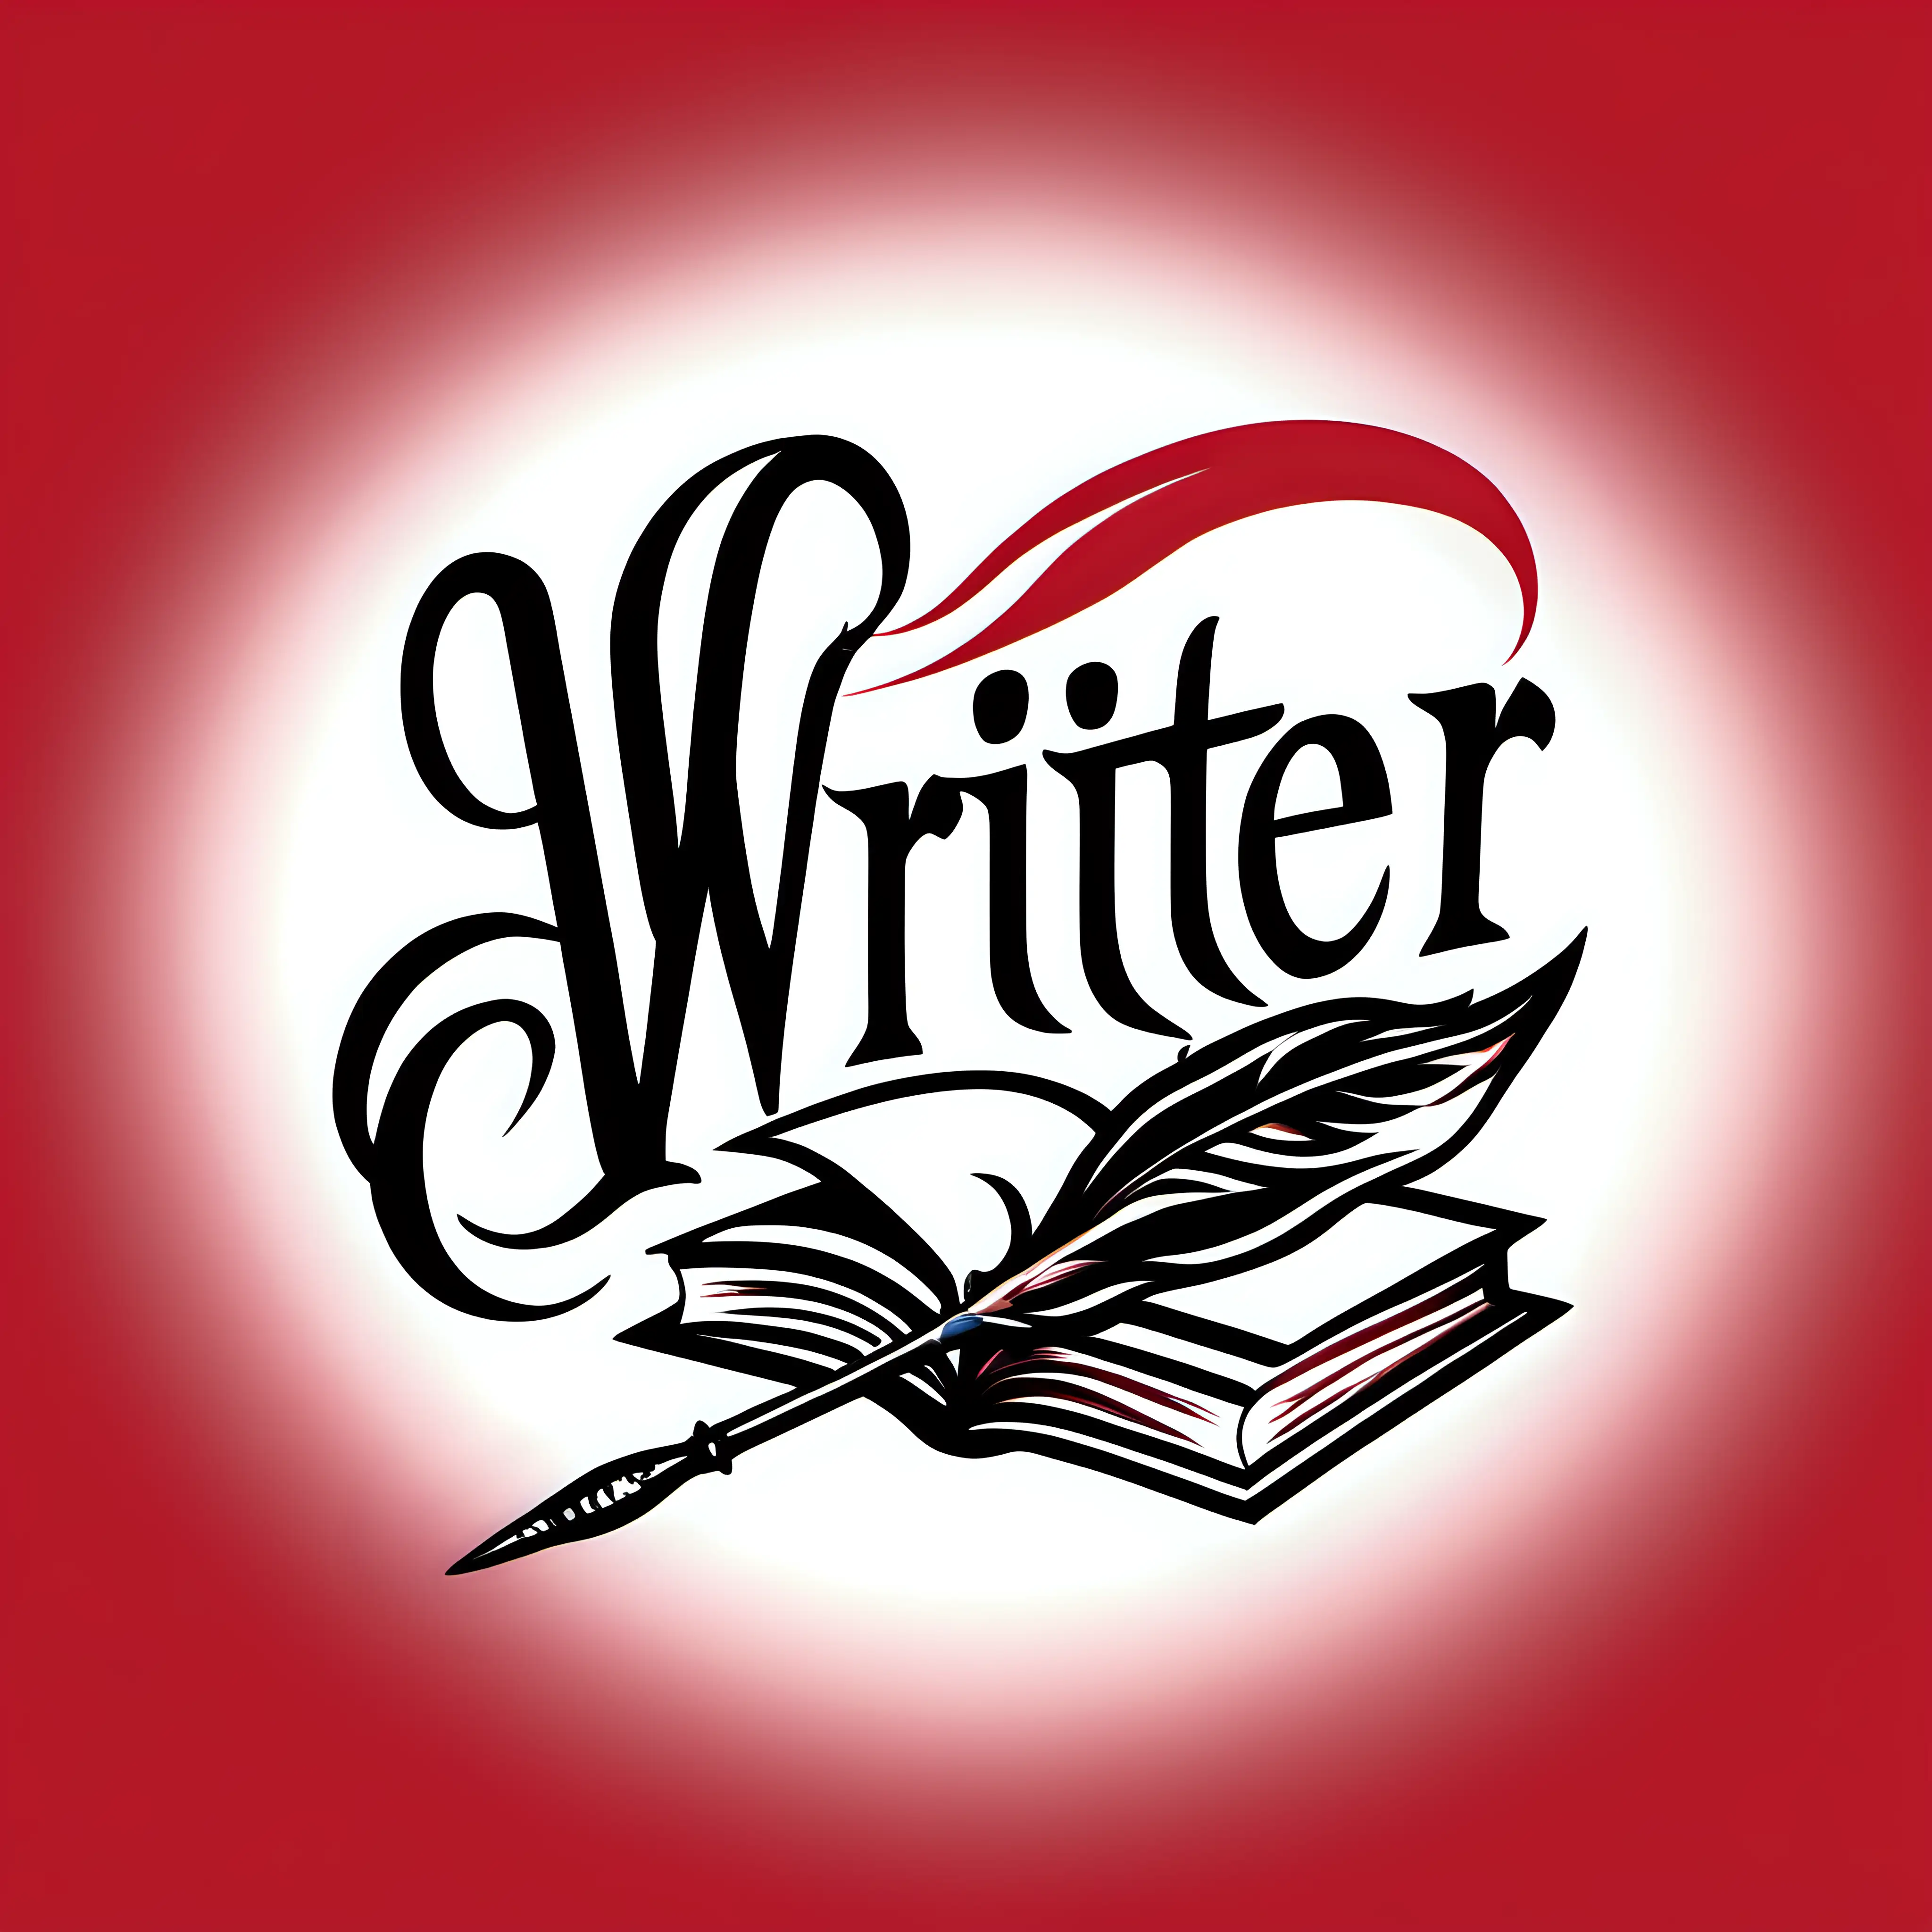 logo for a writer with a feminine aesthetic, book and quill pen, colors in scarlet red and black with white or transparent background